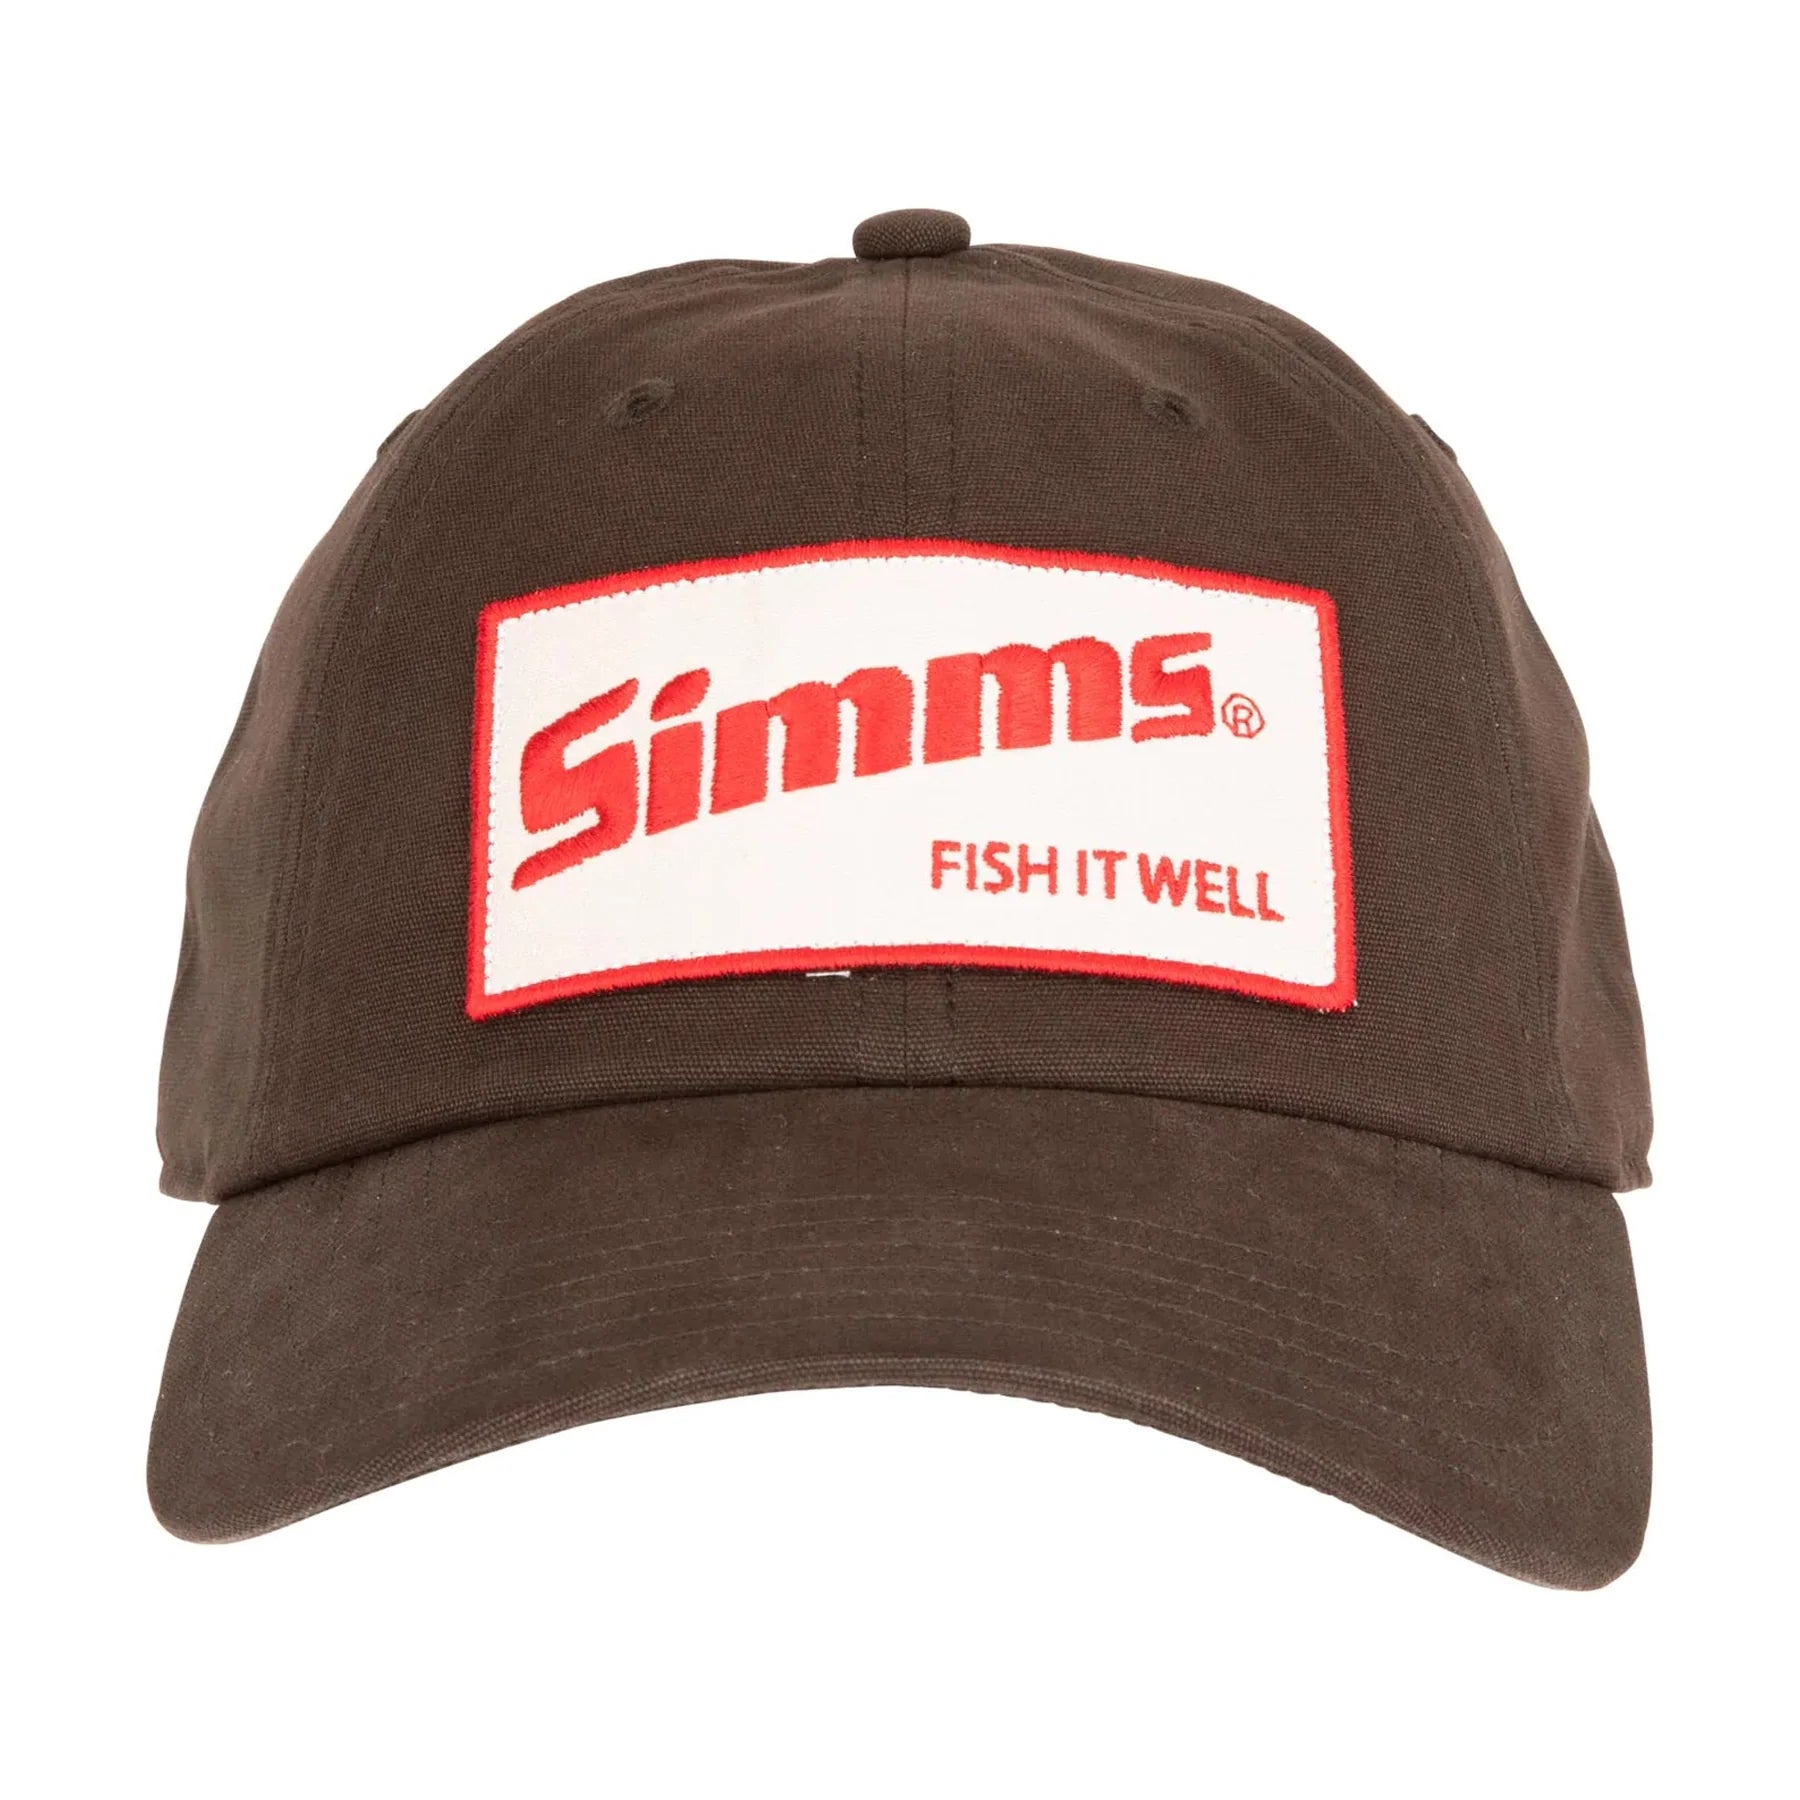 Simms Fish It Well Cap Hickory